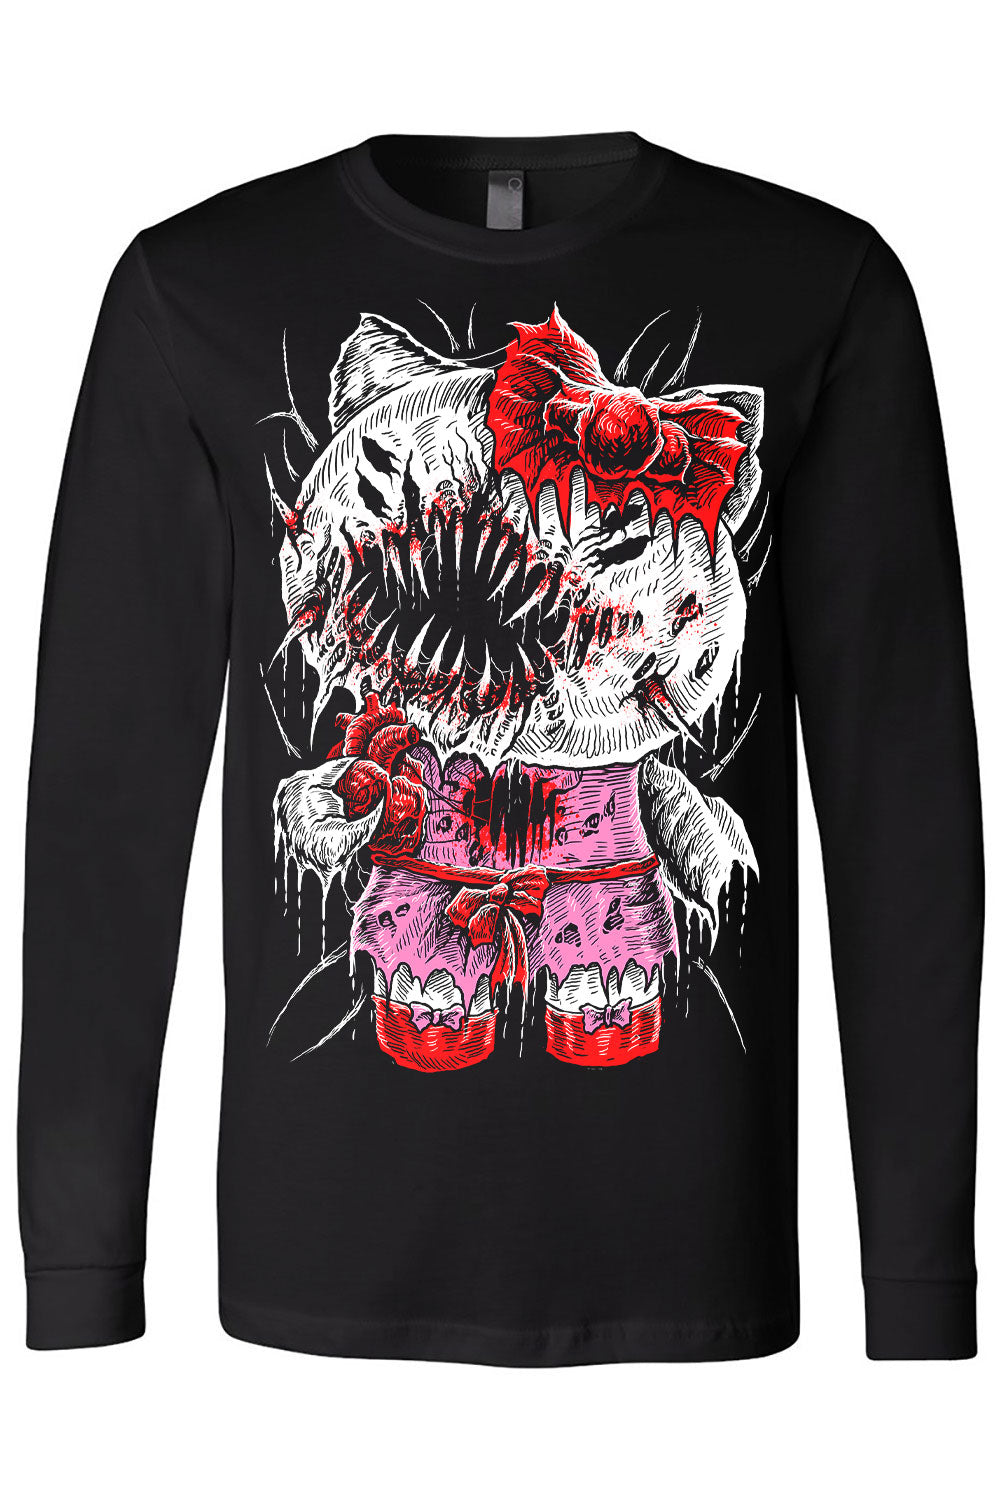 anti valentines day long sleeve shirt for men